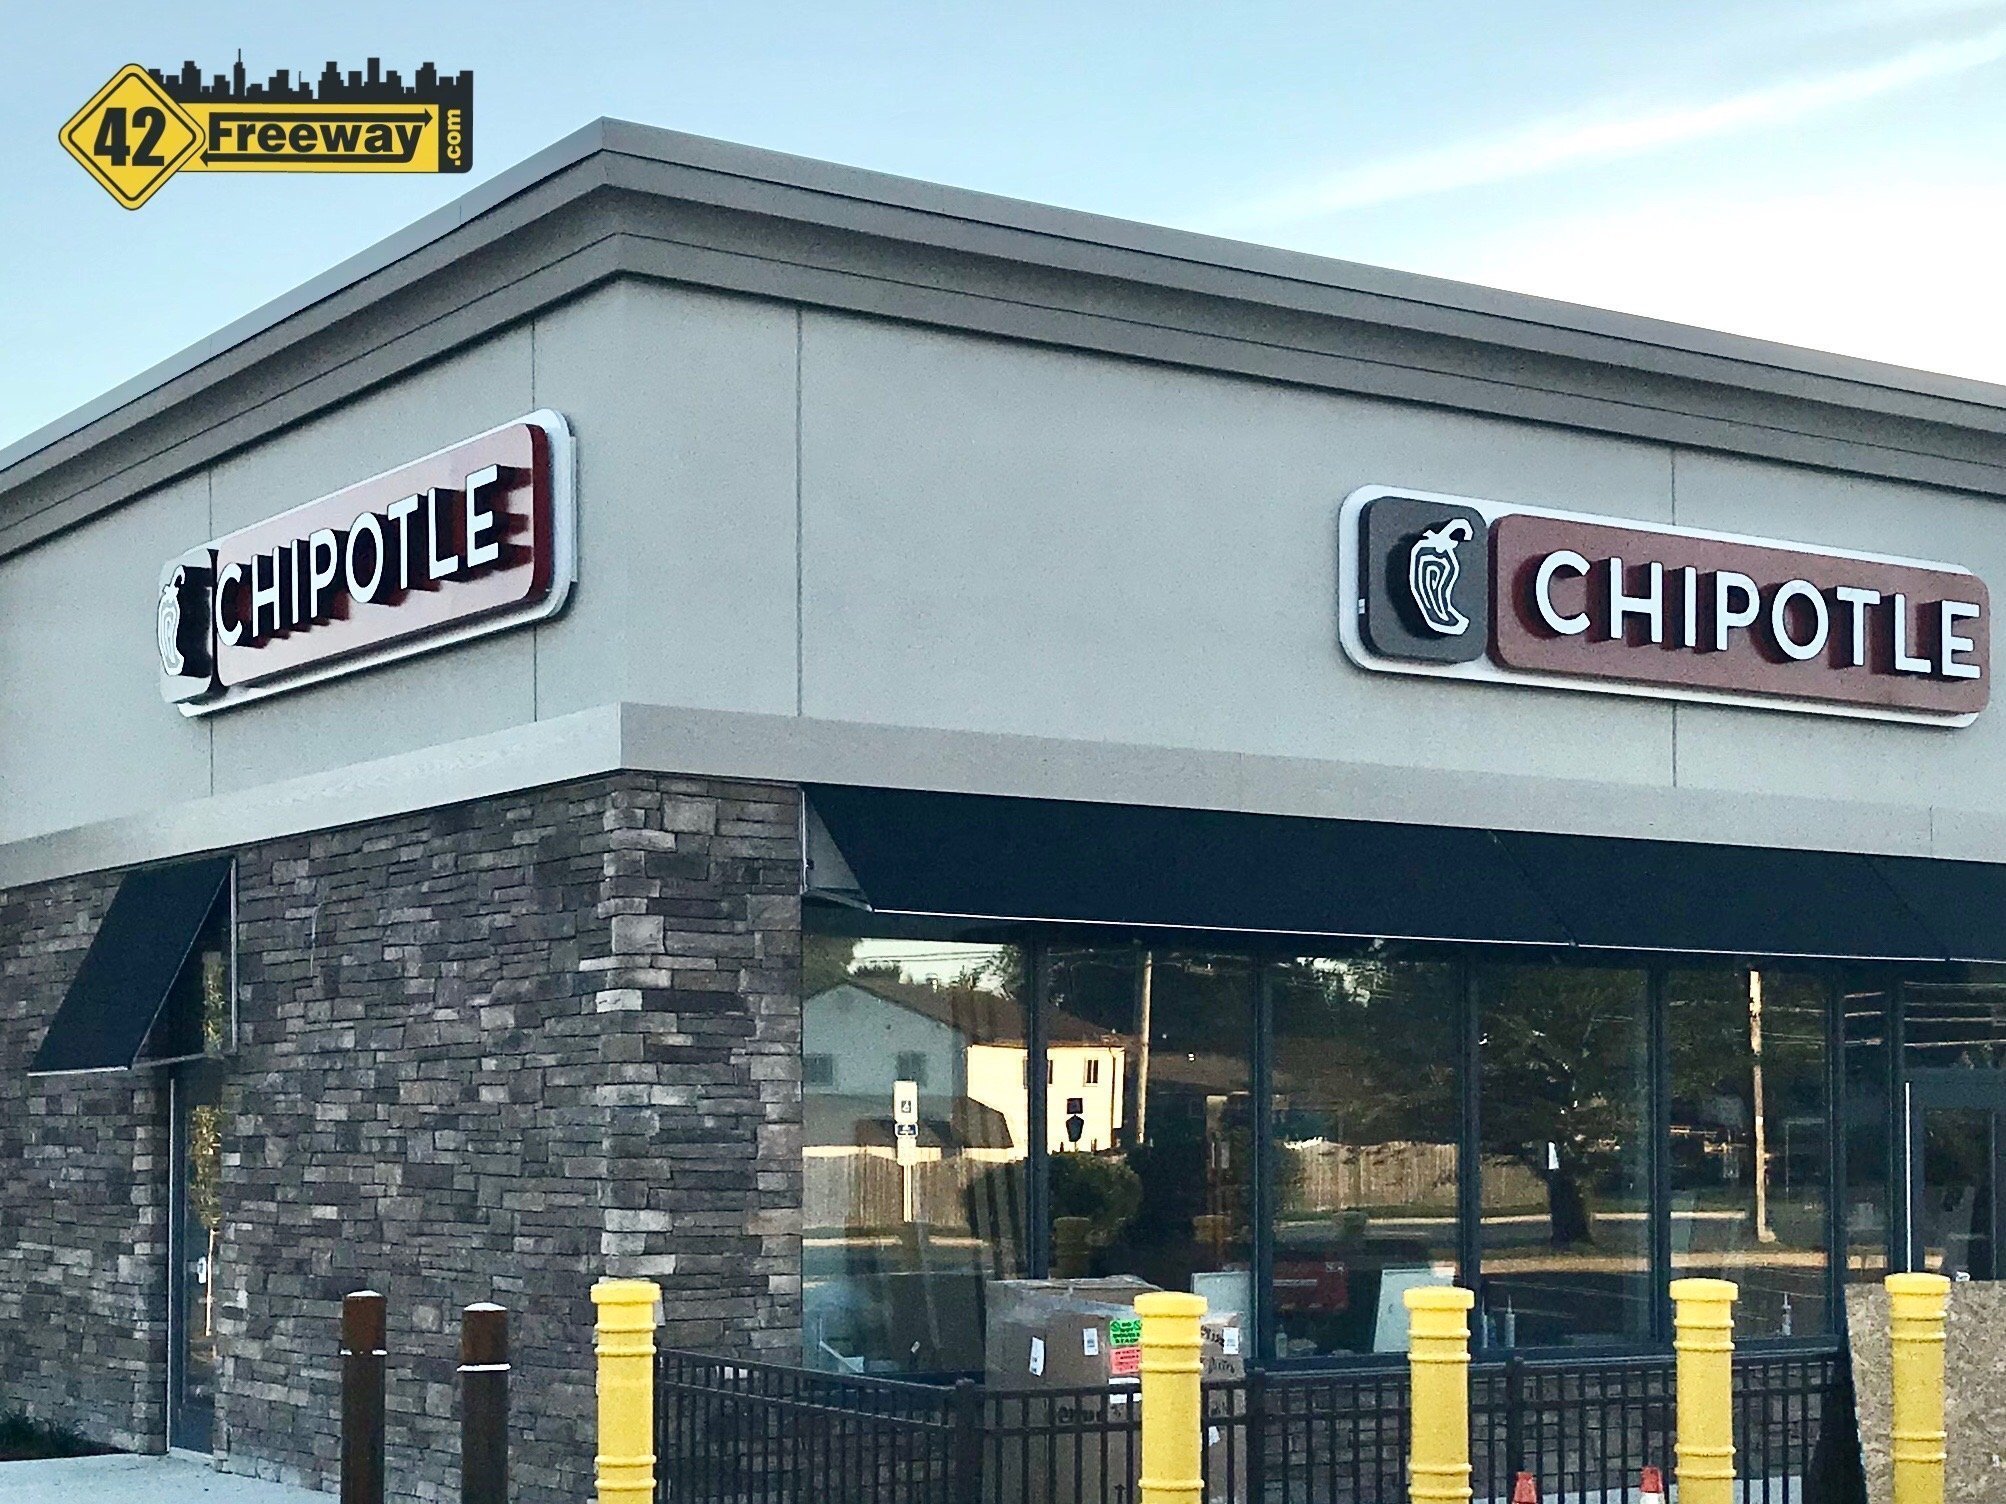 Chipotle Washington Twp is OPEN! Located on Egg Harbor Road in Front of